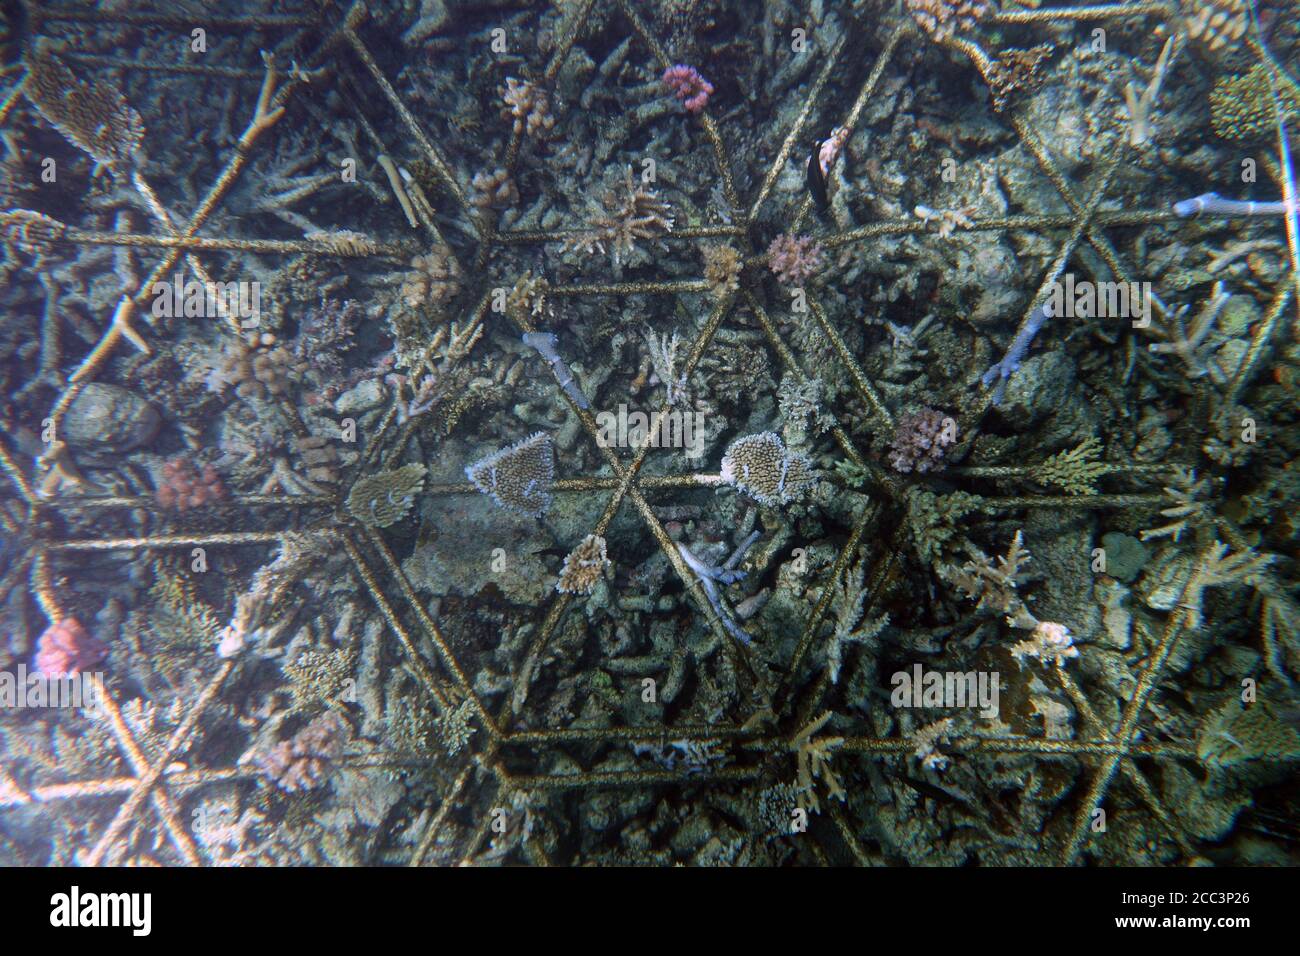 Area of coral rubble that has been stabilised and 'planted' with live coral fragments as part of a reef restoration project, Moore Reef, Great Barrier Stock Photo